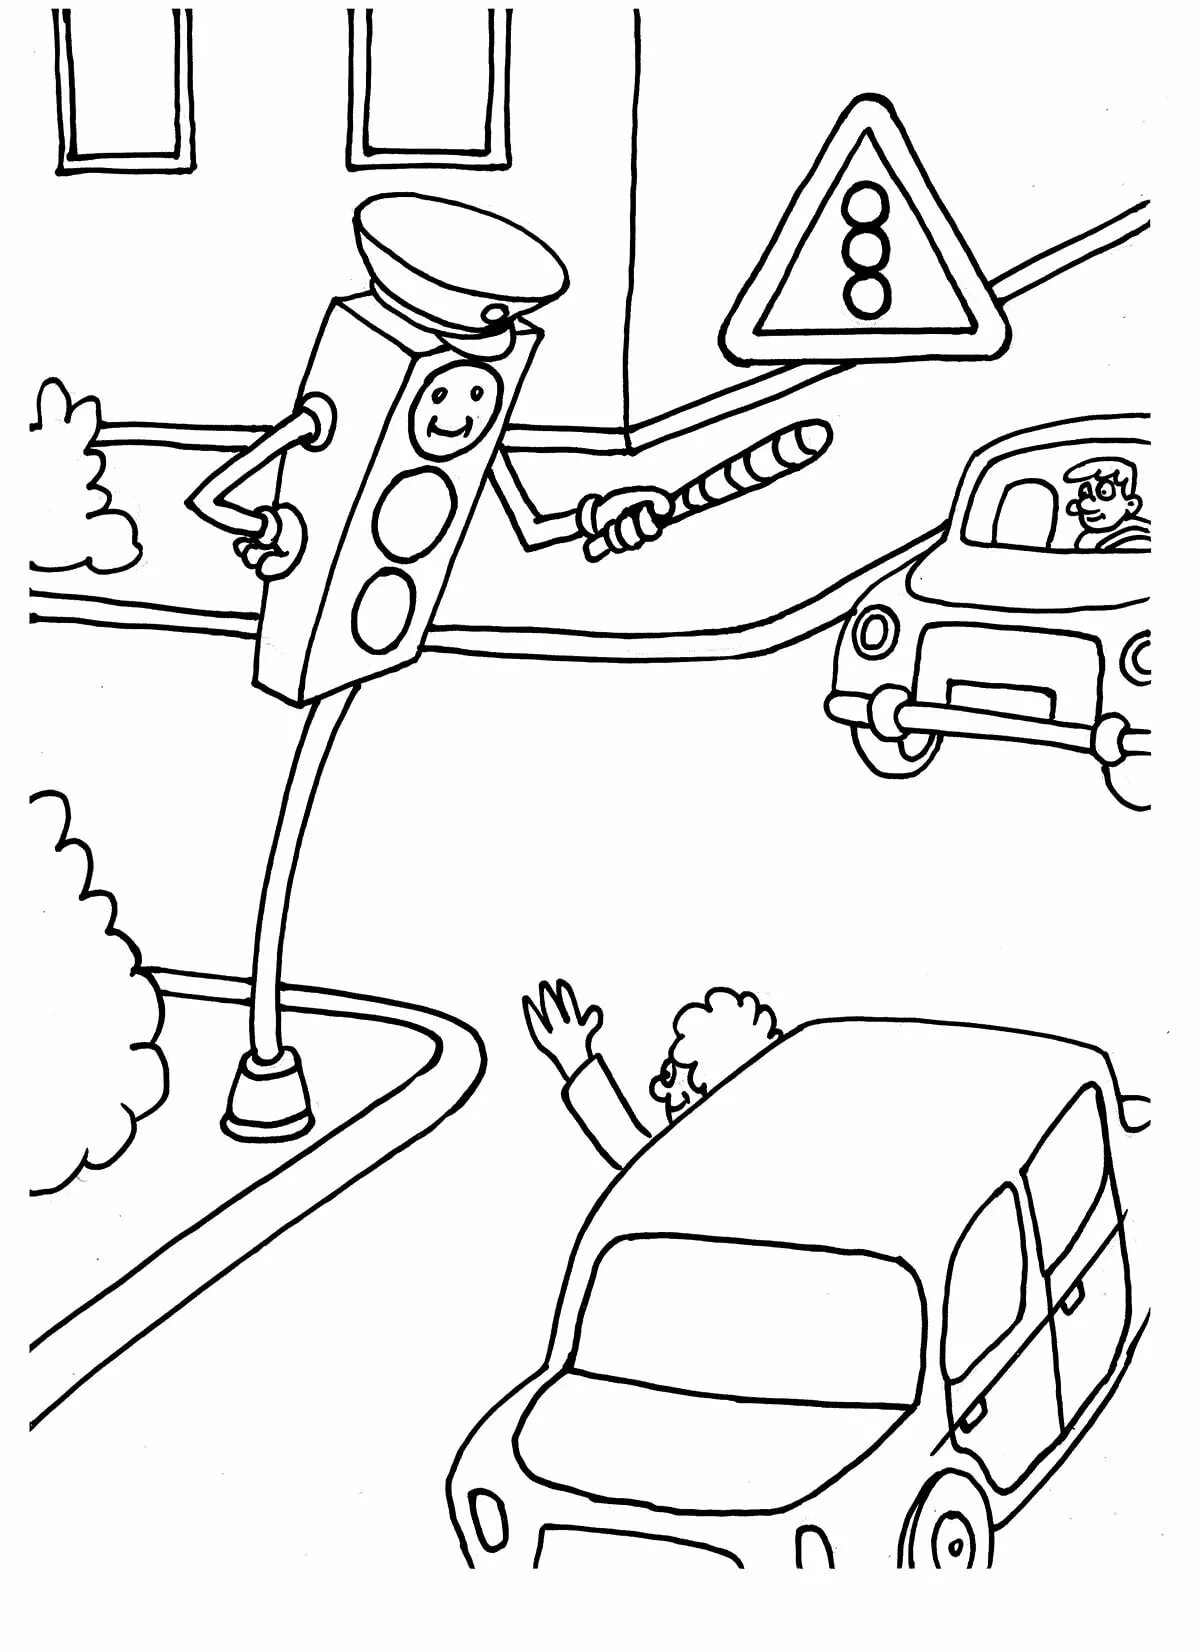 Traffic signs for preschool children according to traffic rules #6